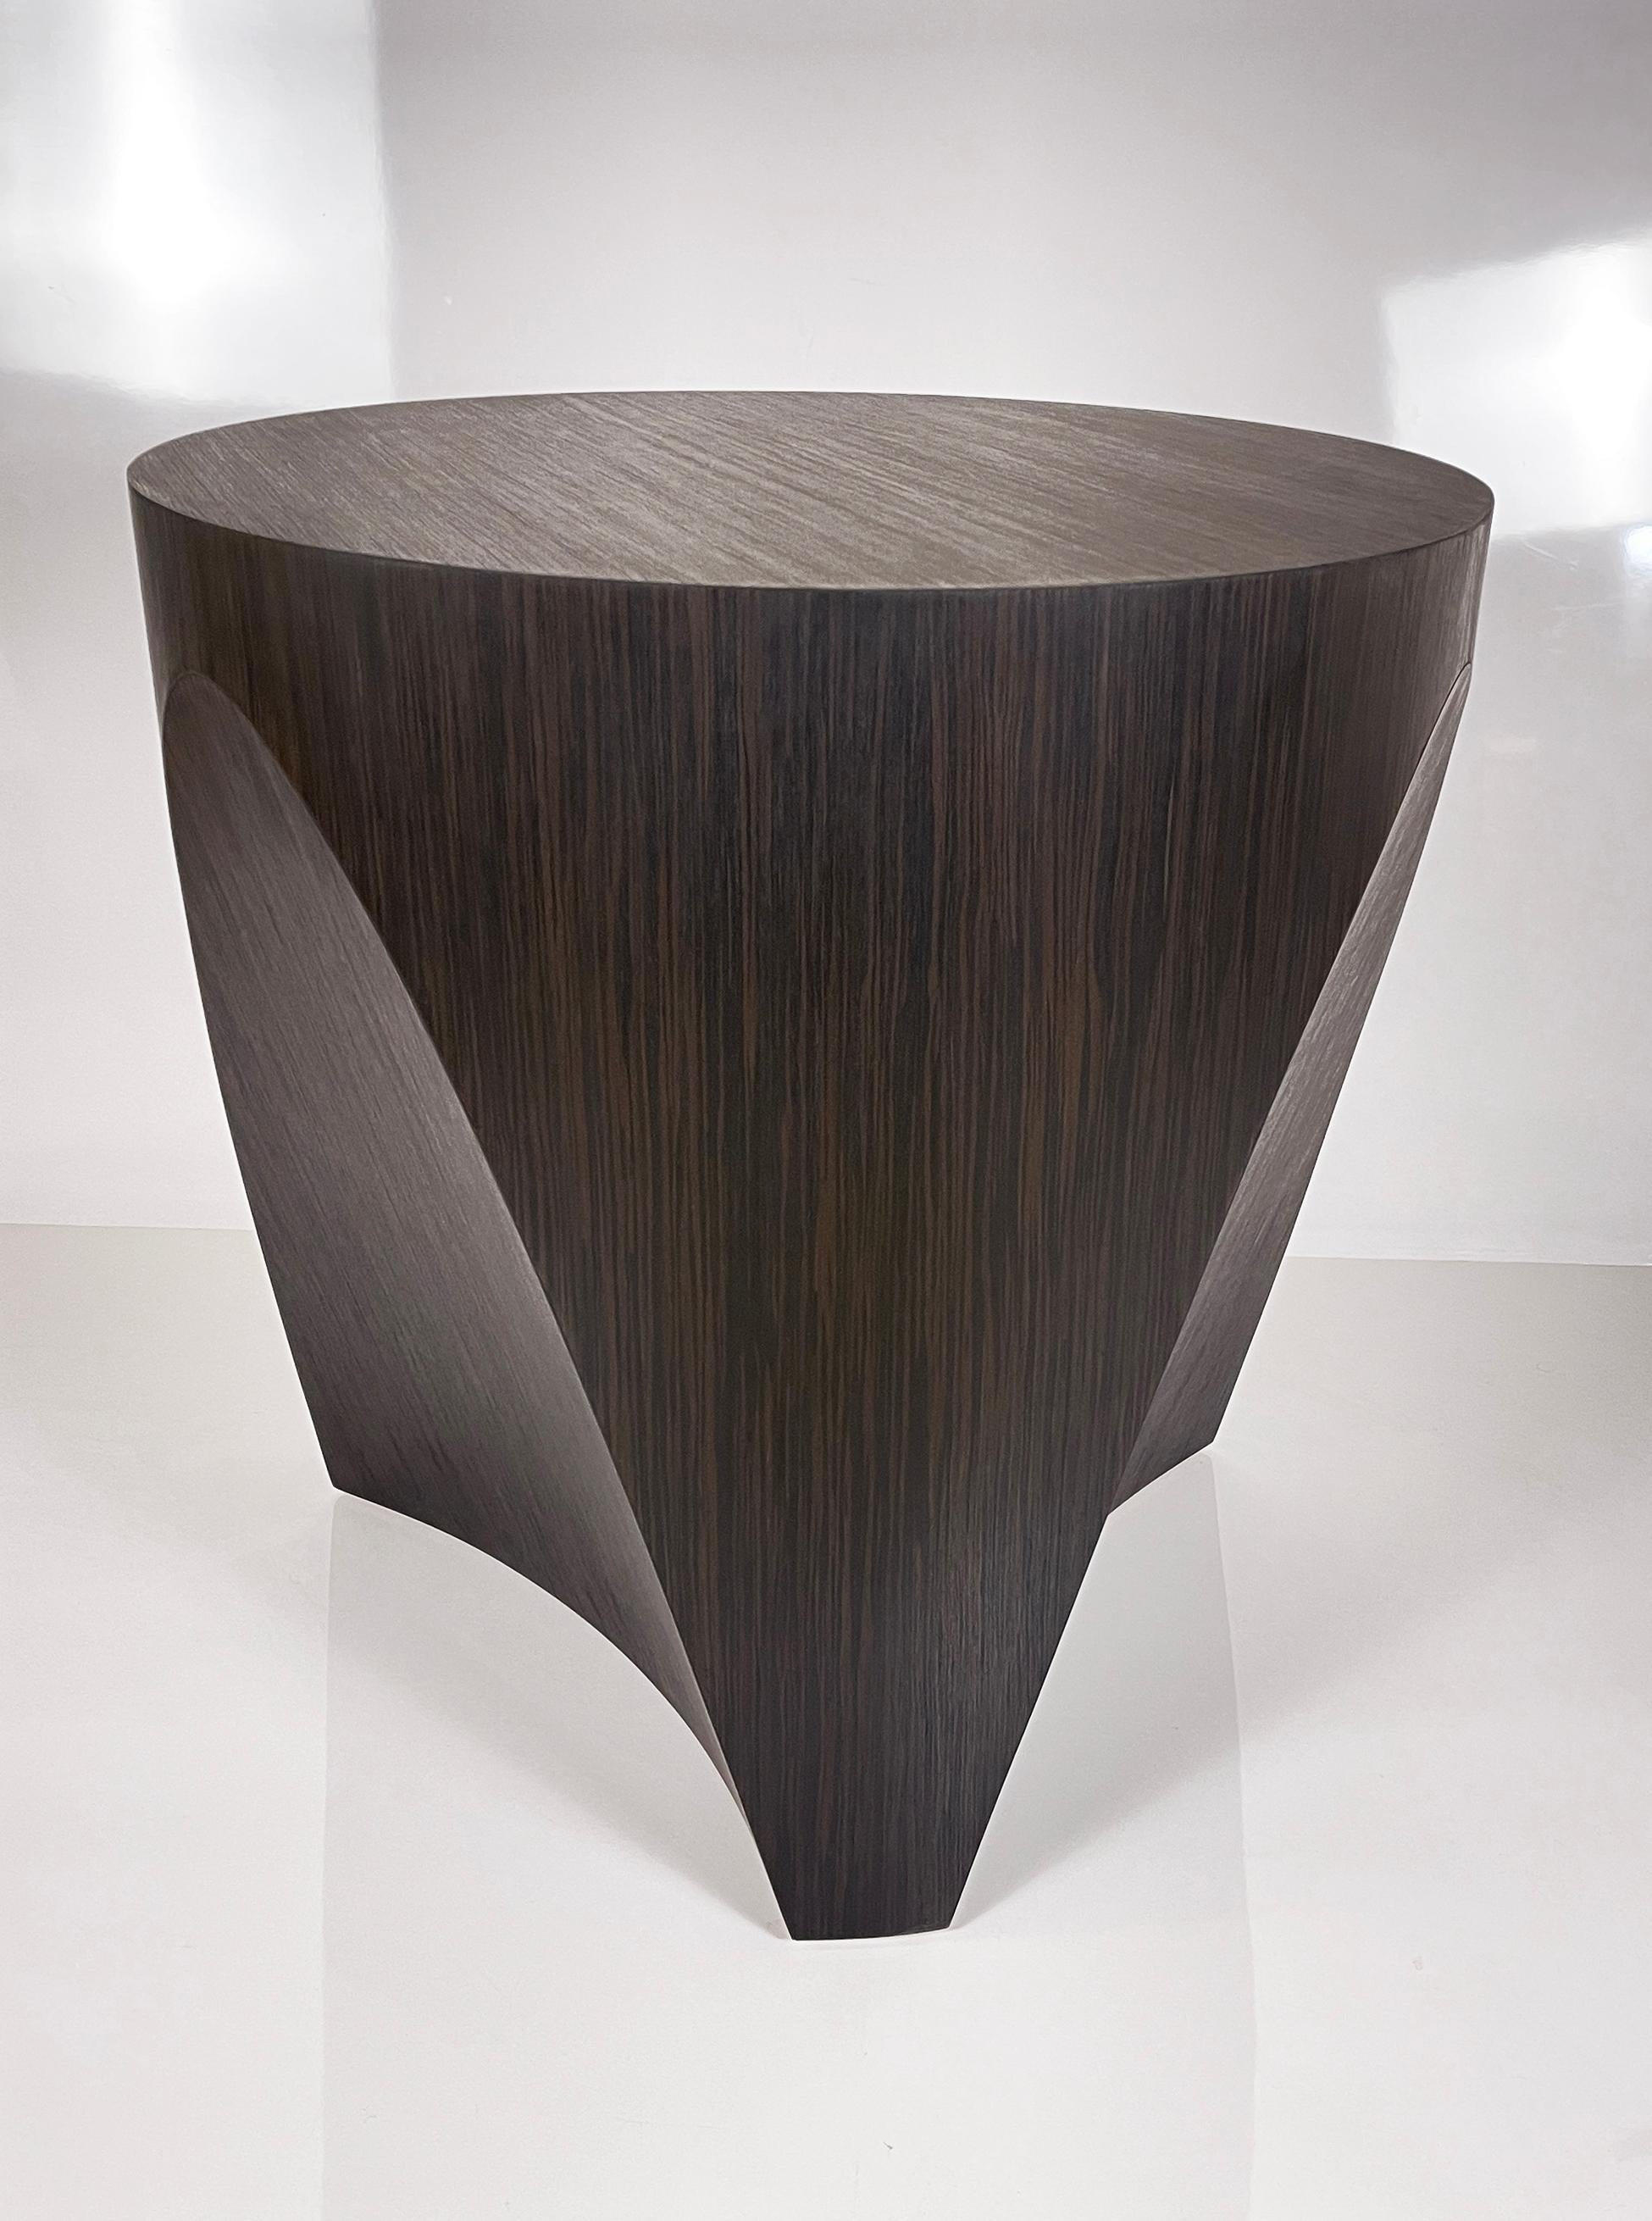 Hand-Crafted Barrens Dining Pedestal or Center Table